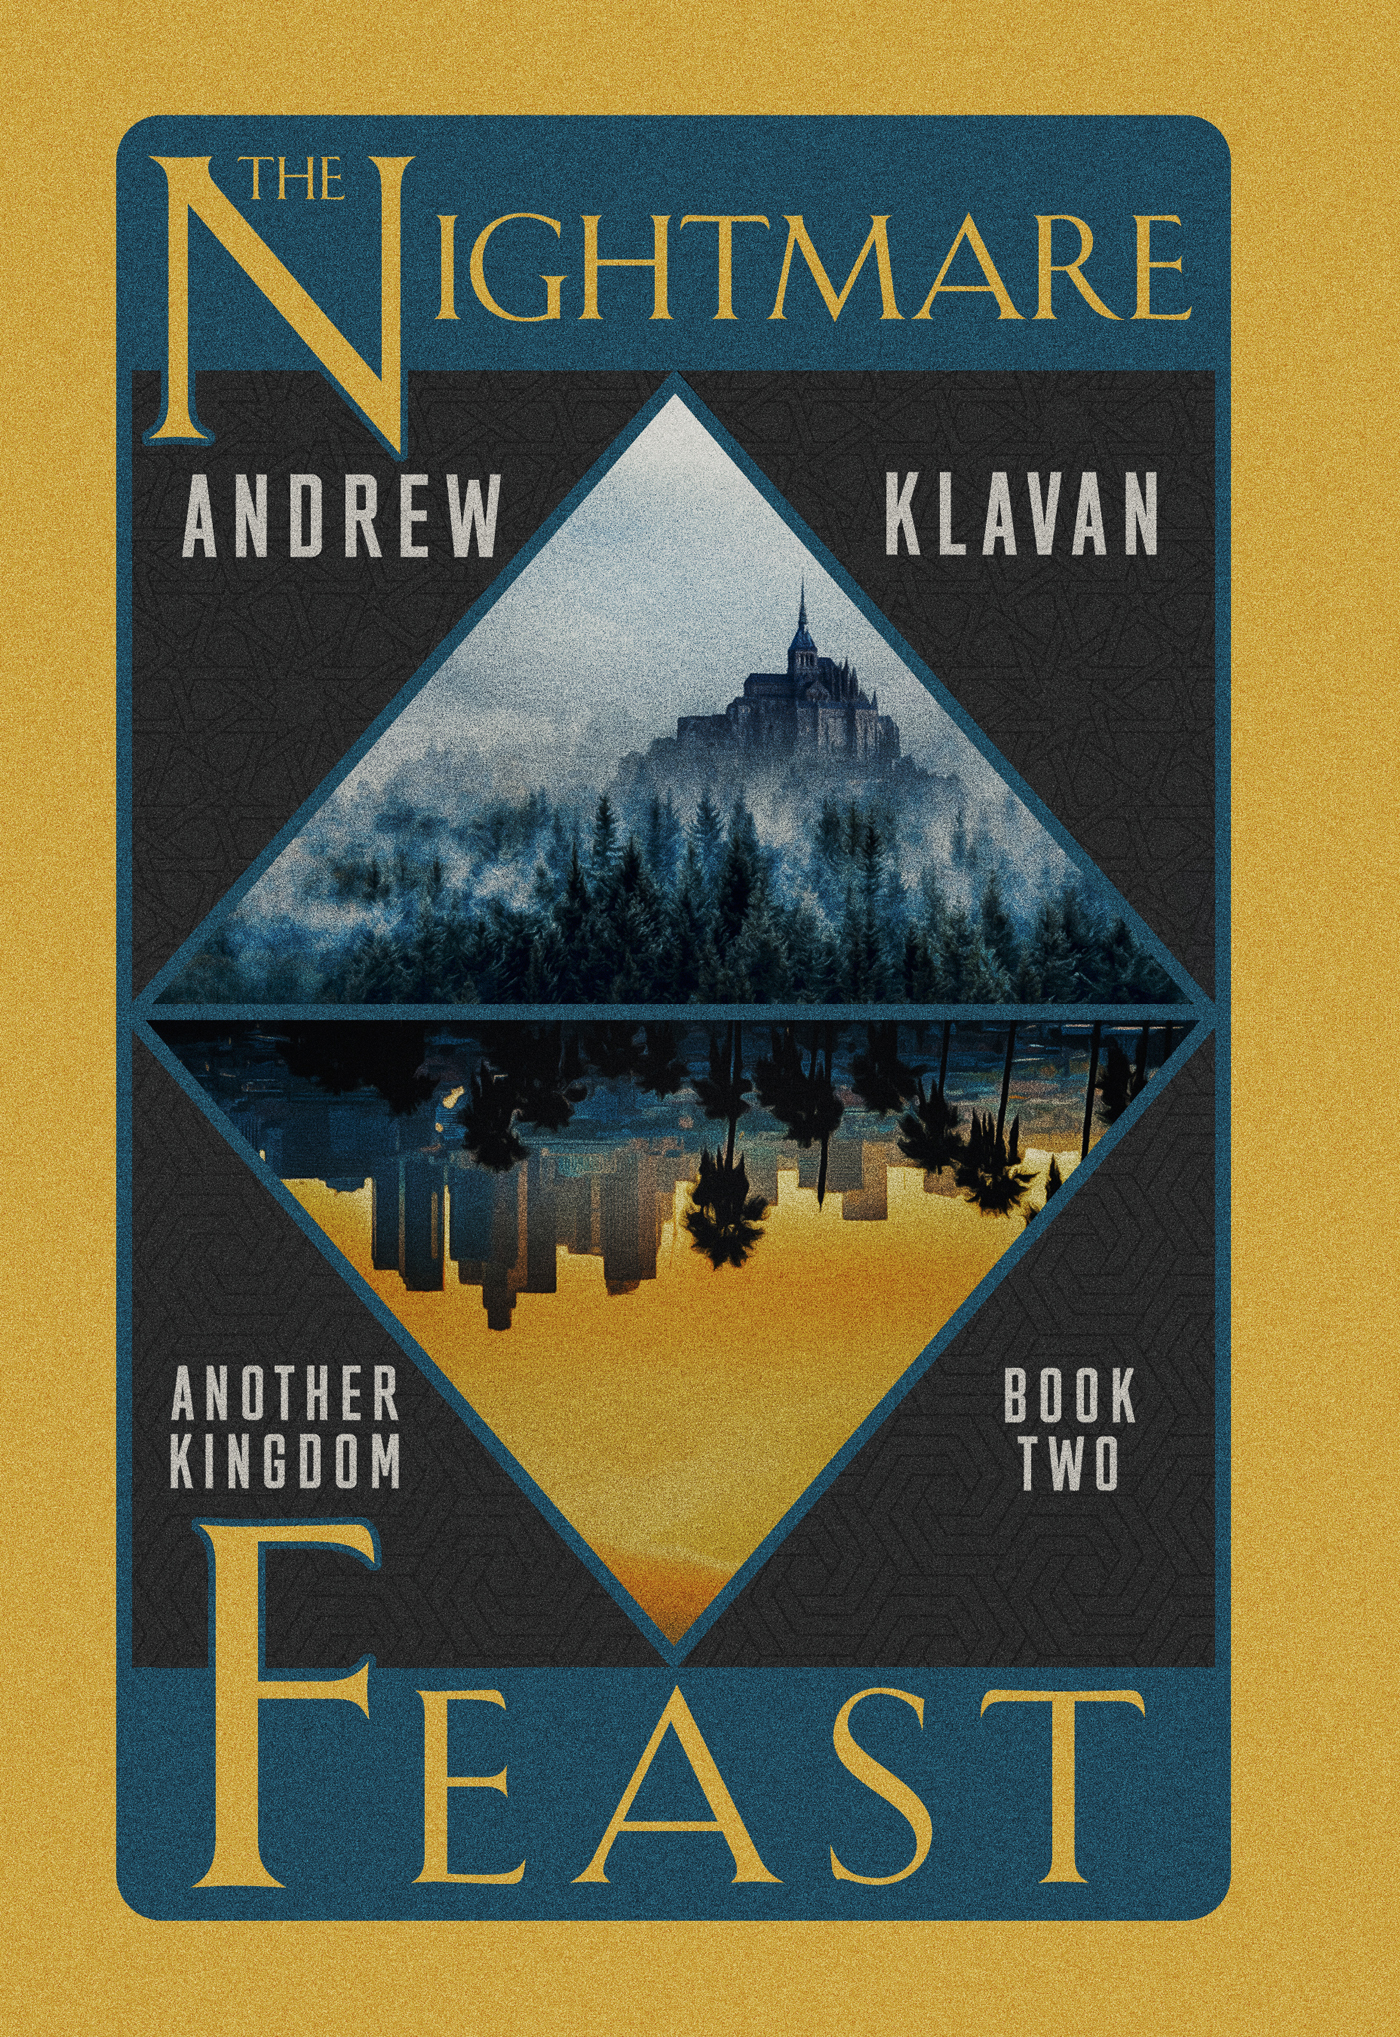 The Nightmare Feast: Another Kingdom, Book Two by Andrew Klavan